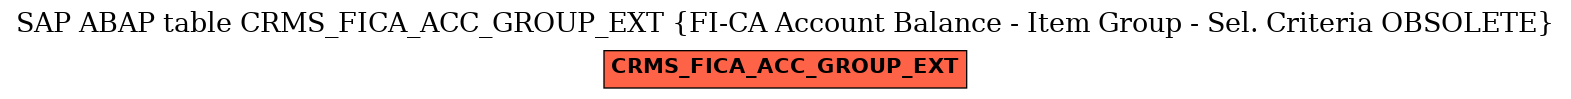 E-R Diagram for table CRMS_FICA_ACC_GROUP_EXT (FI-CA Account Balance - Item Group - Sel. Criteria OBSOLETE)